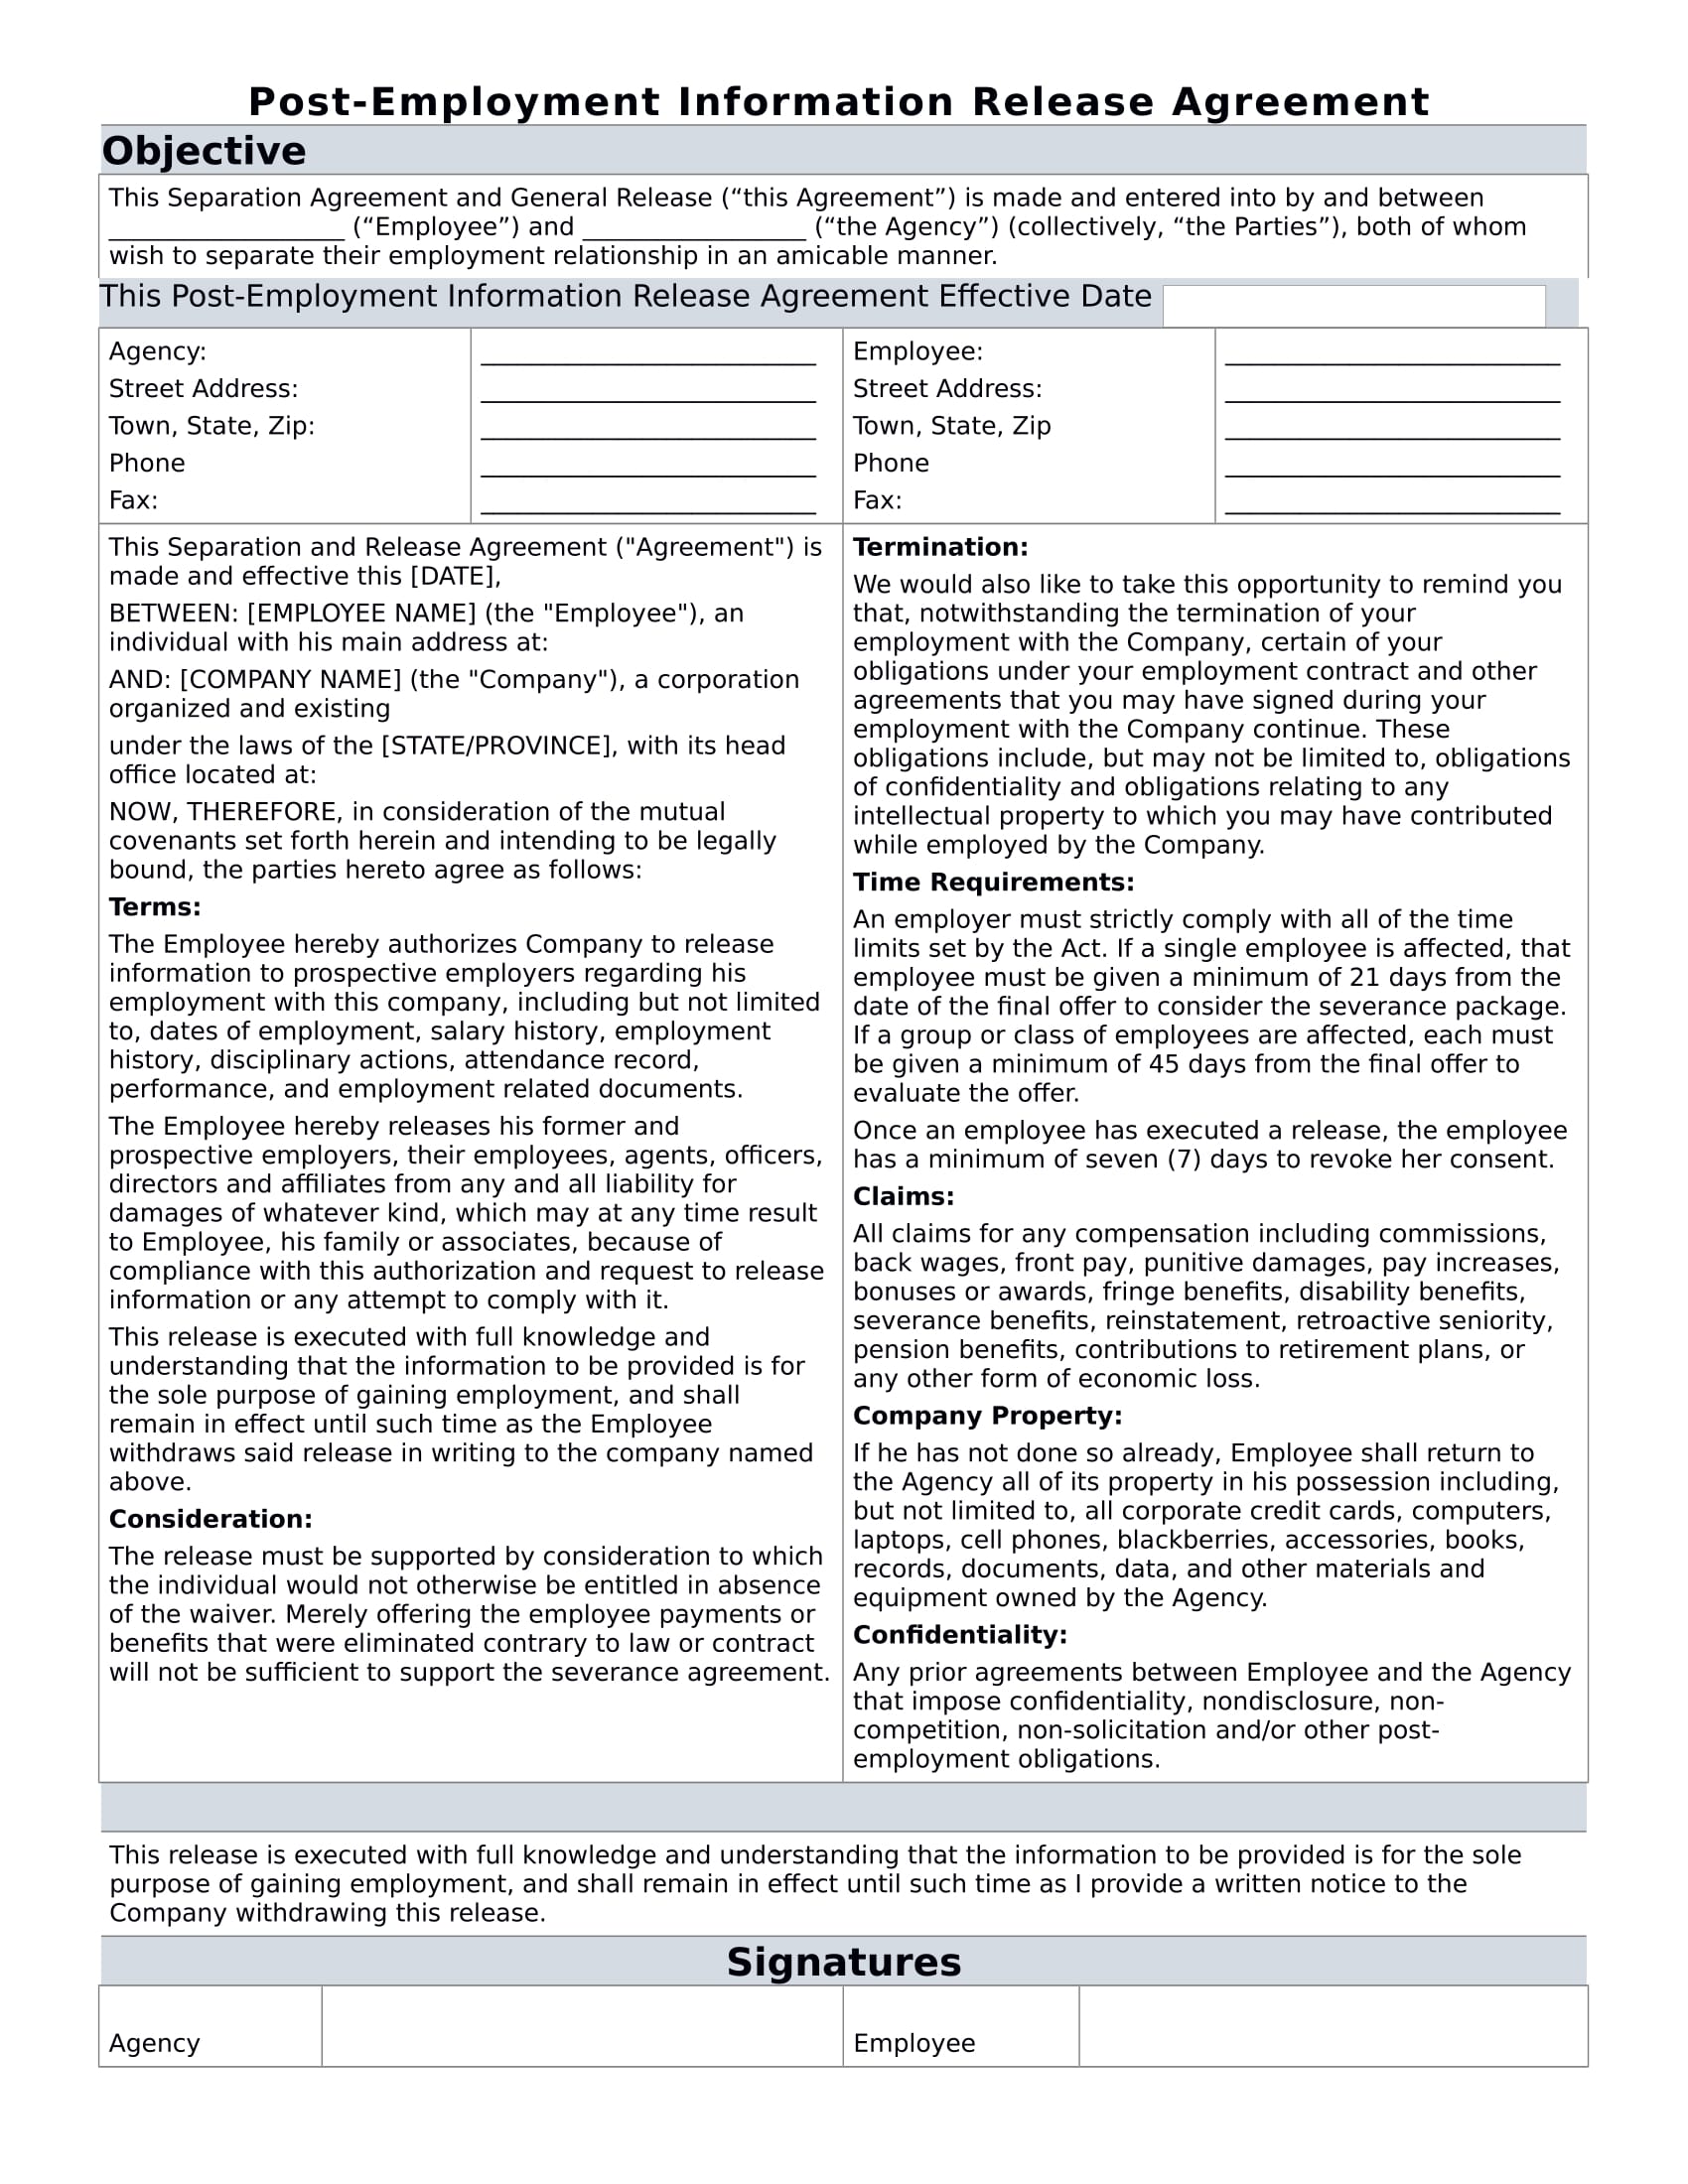 post employment information release agreement form 1